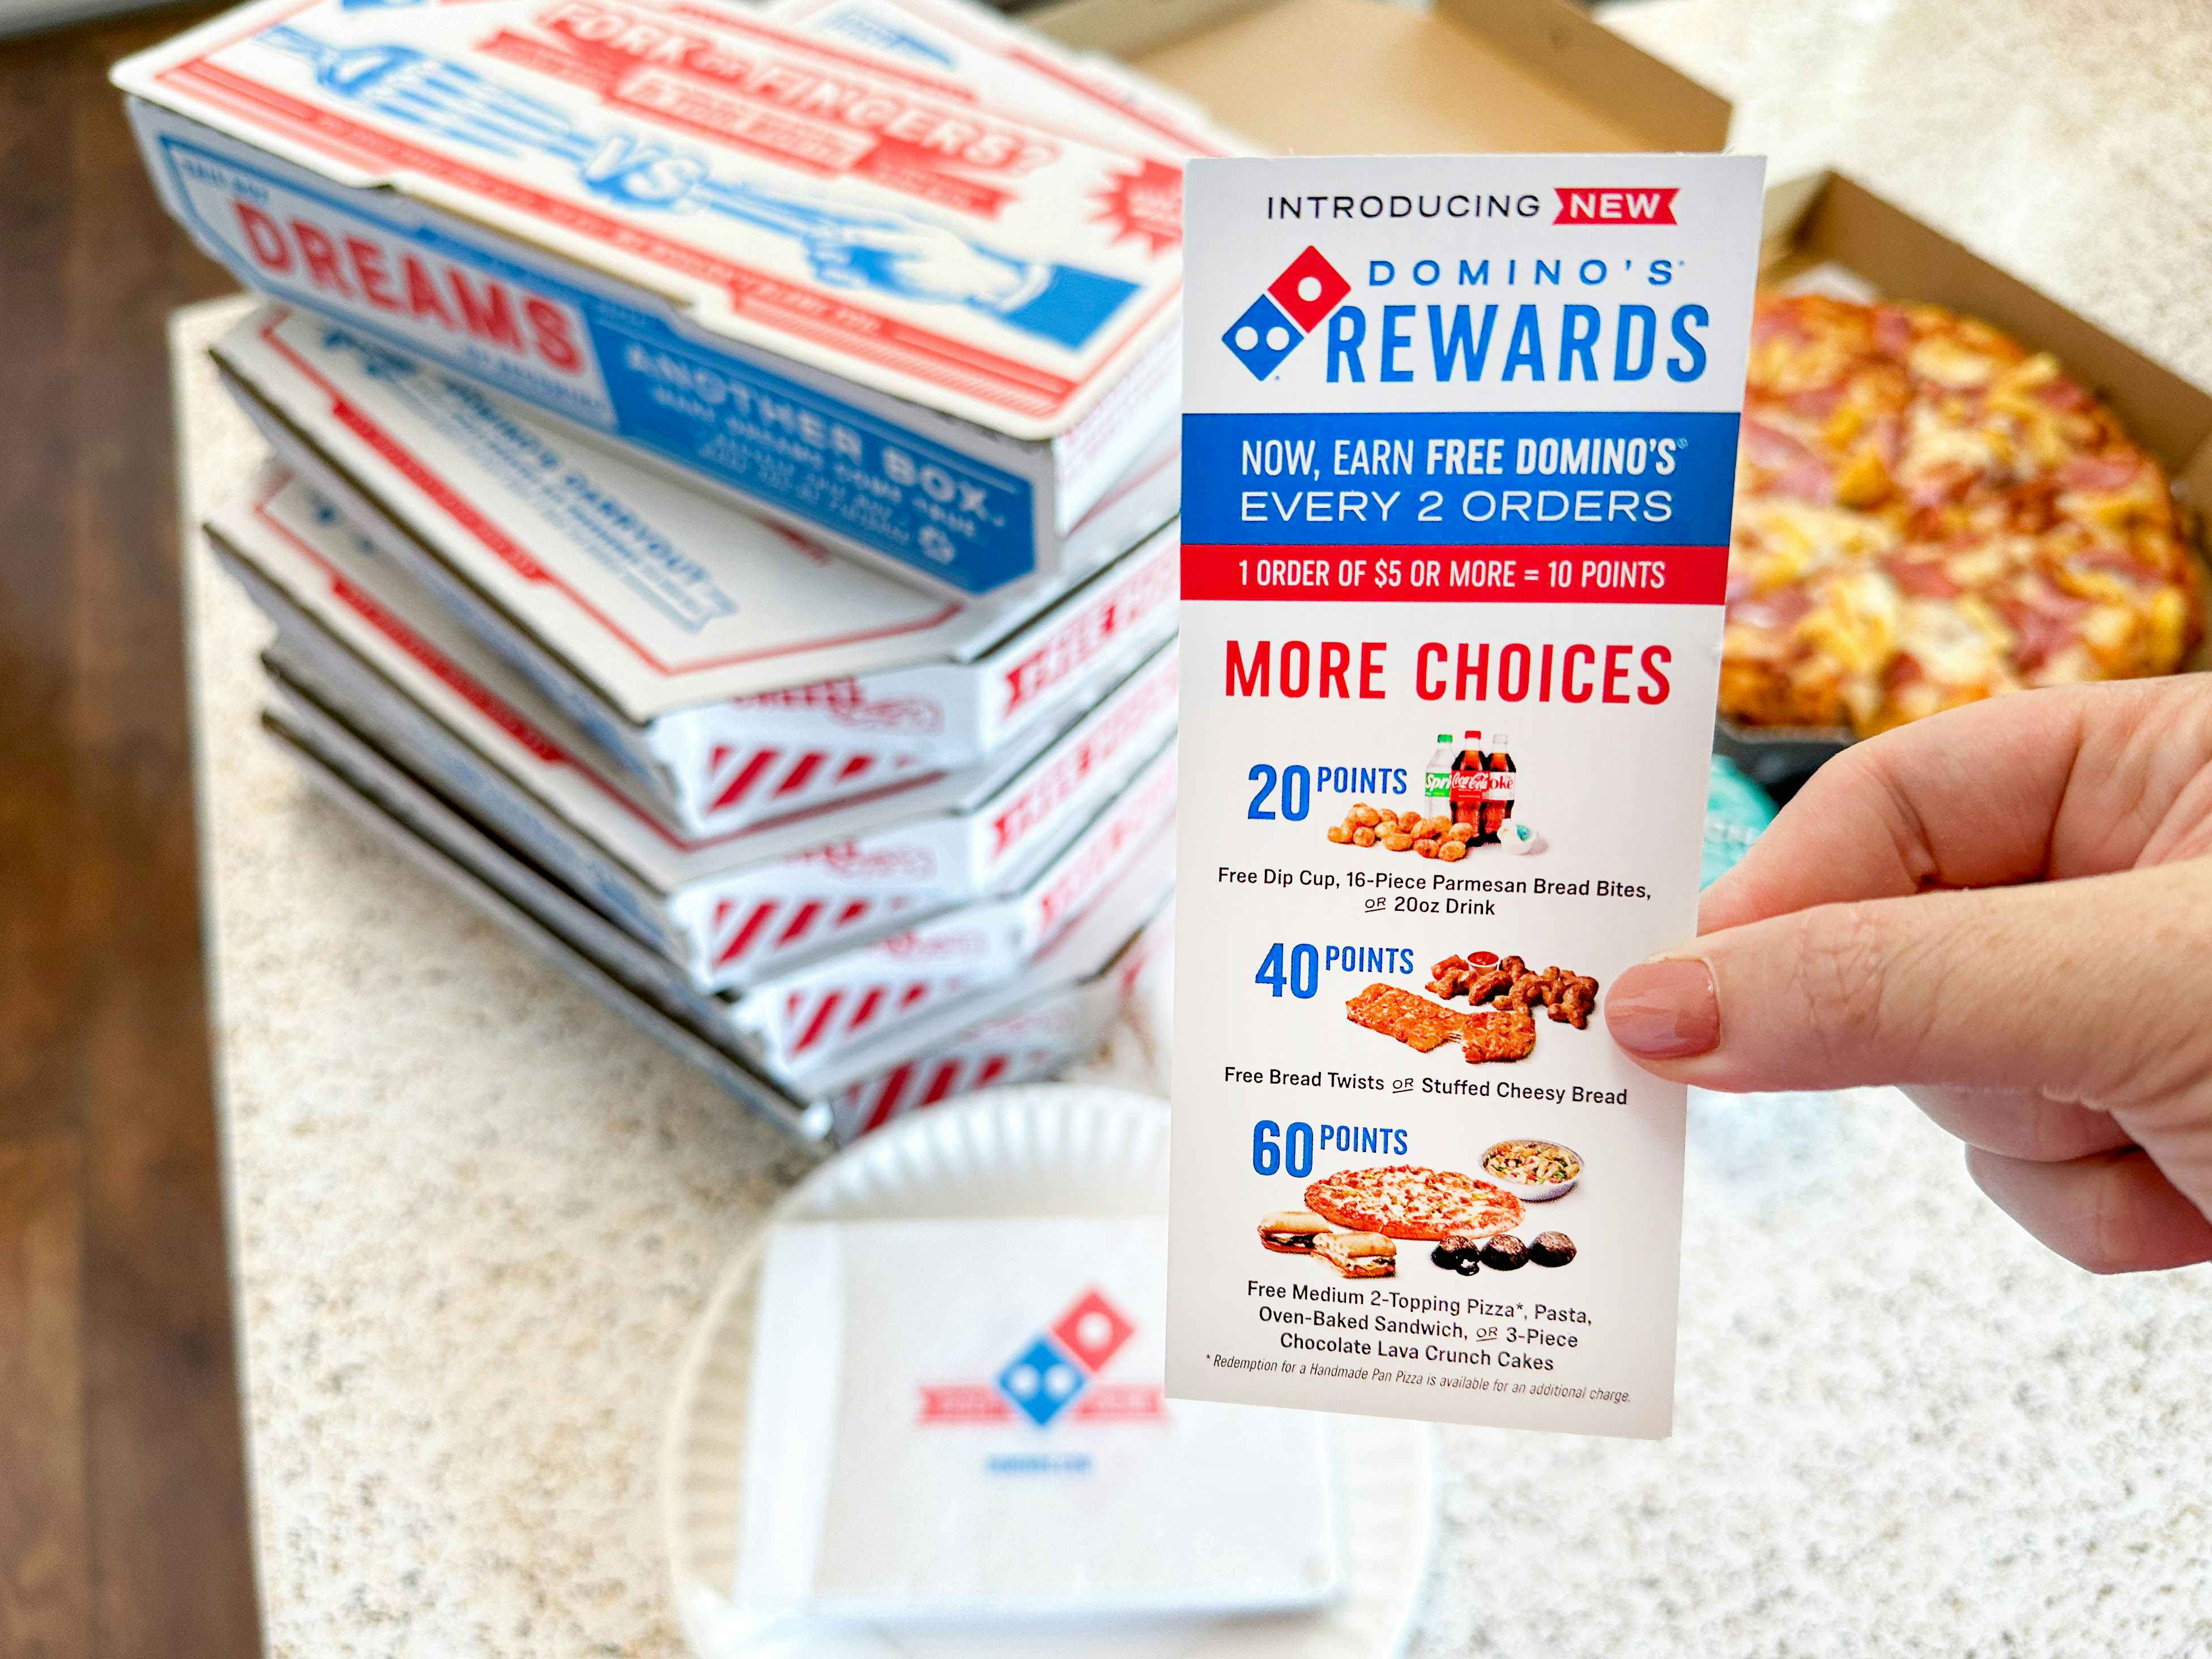 a dominos rewards flyer being held in front of pizza boxes 